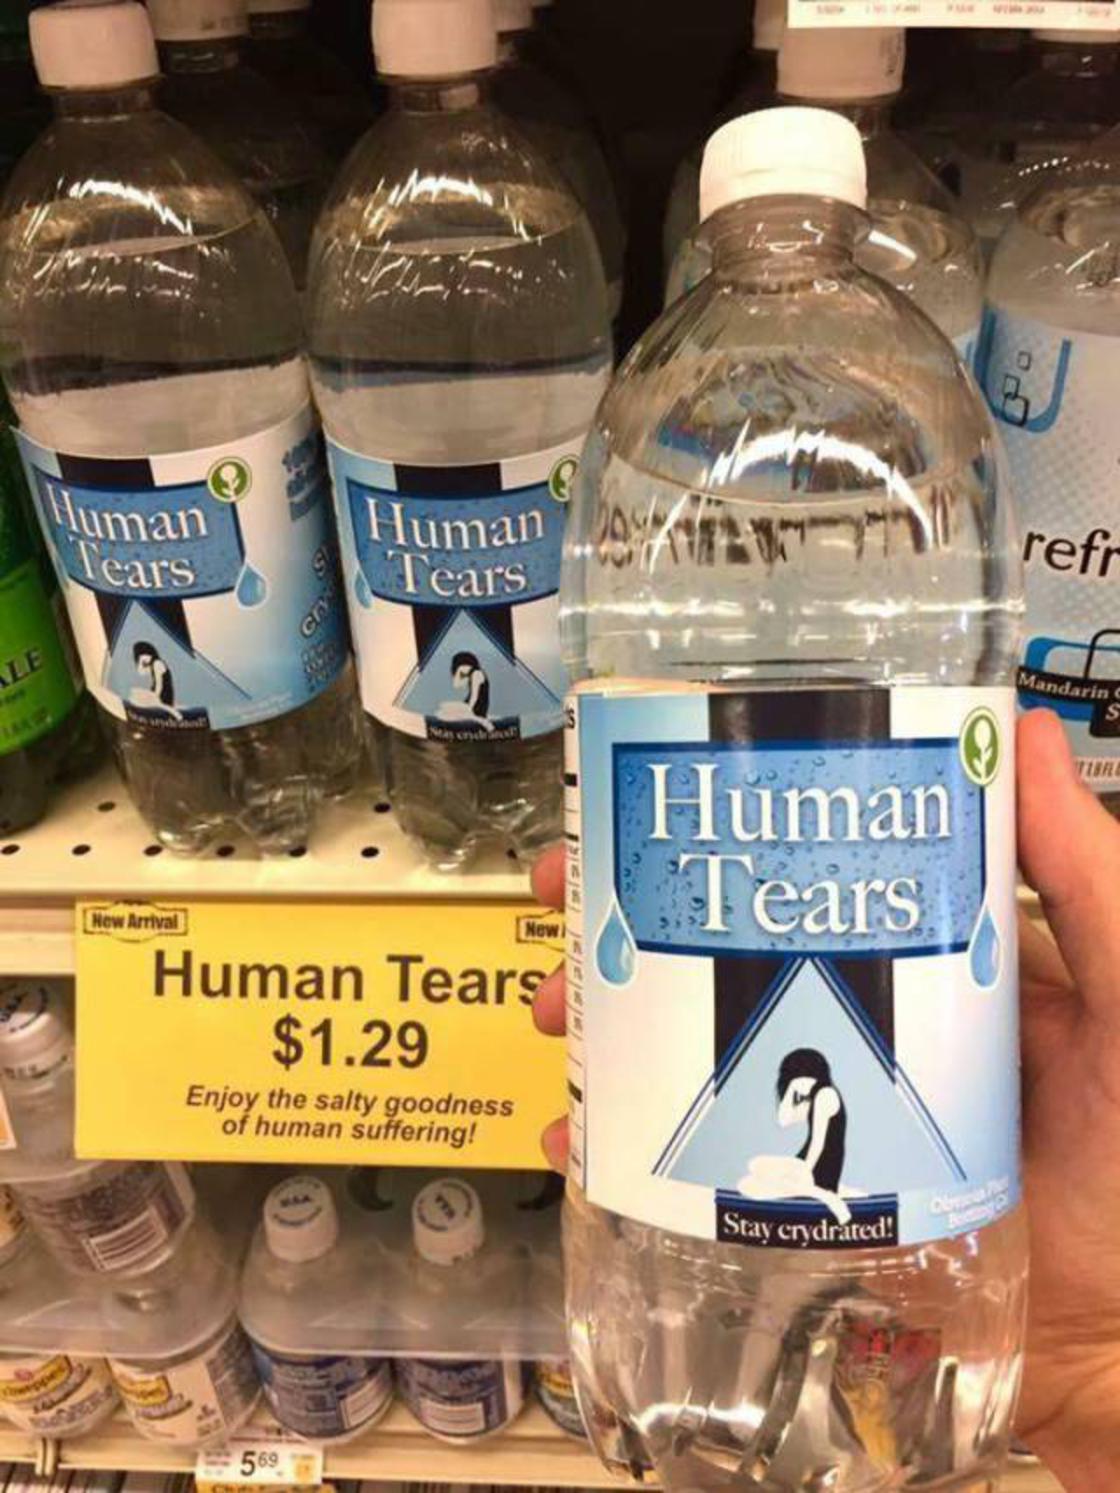 human tears meme - Human Tears Human Tears refr Mandarin Tuire Human Tears New Arrival New Human Tears $1.29 Enjoy the salty goodness of human suffering! Stay crydrared! 569